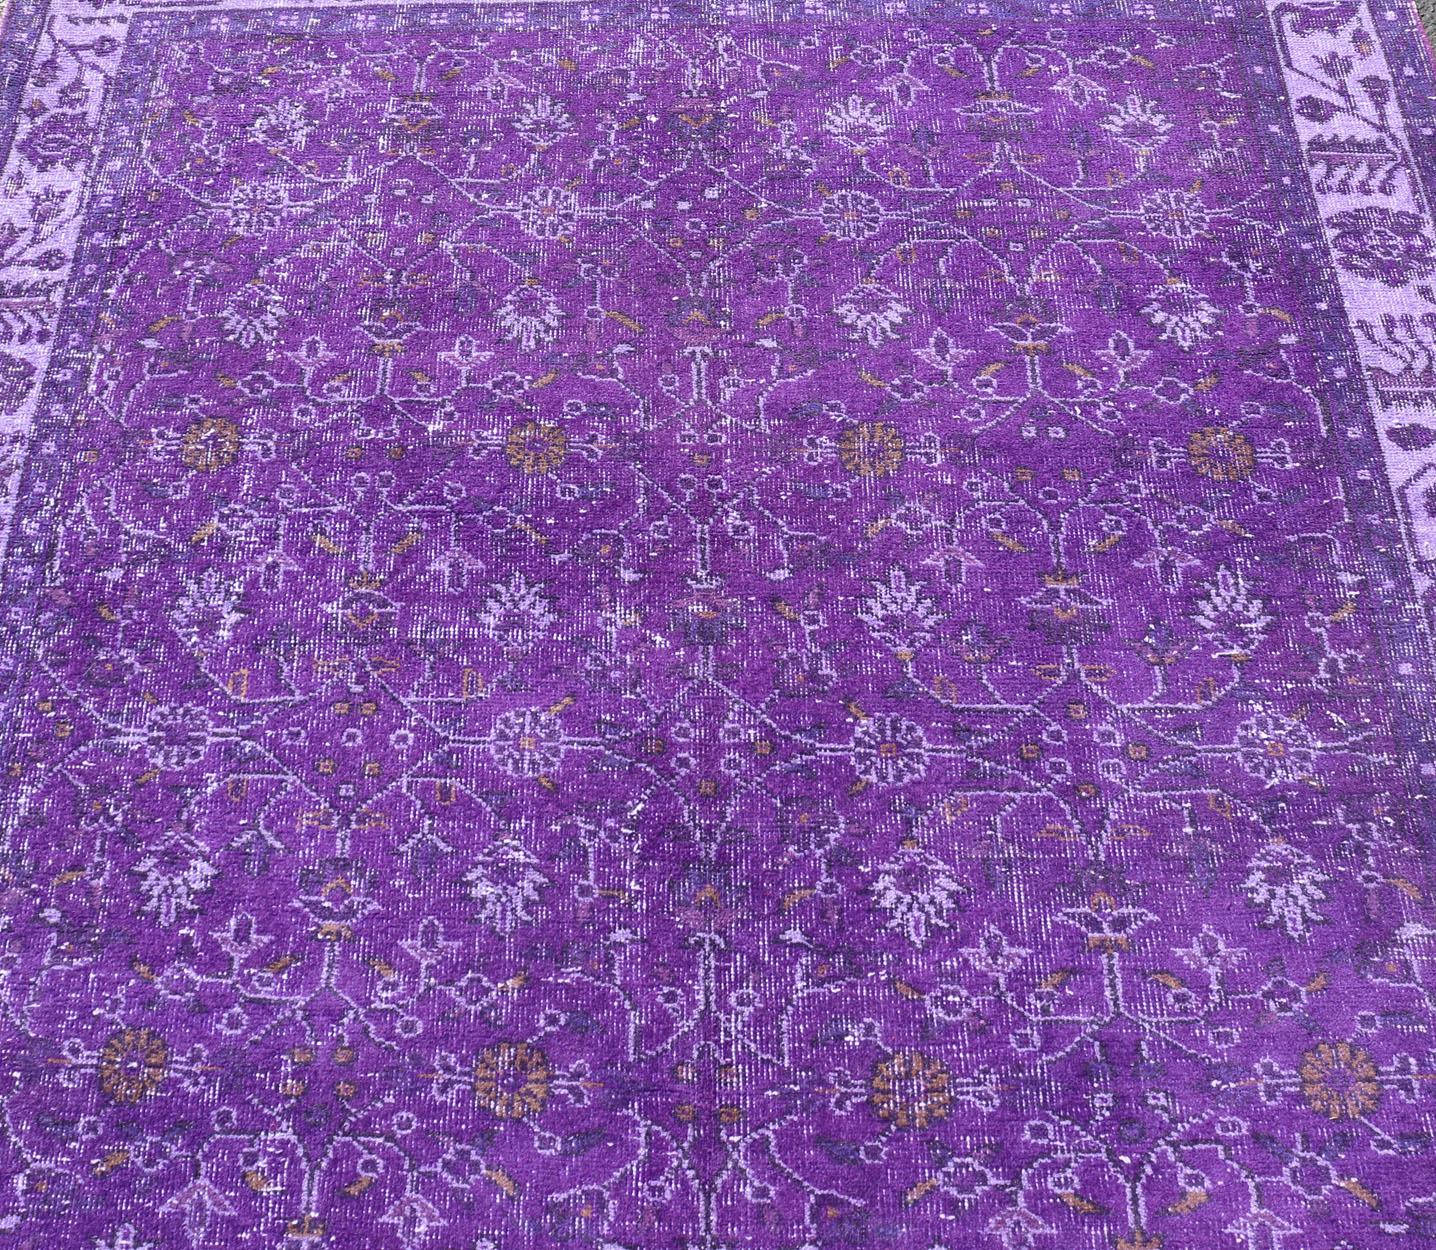 Measures: 5'8 x 9'2.

The field displays a Oushak design, utilizing repeating stylized floral motifs. The border homes a foliage-like pattern complimentary to the field design. The entire piece has been overdyed in shades of purple.

Country of